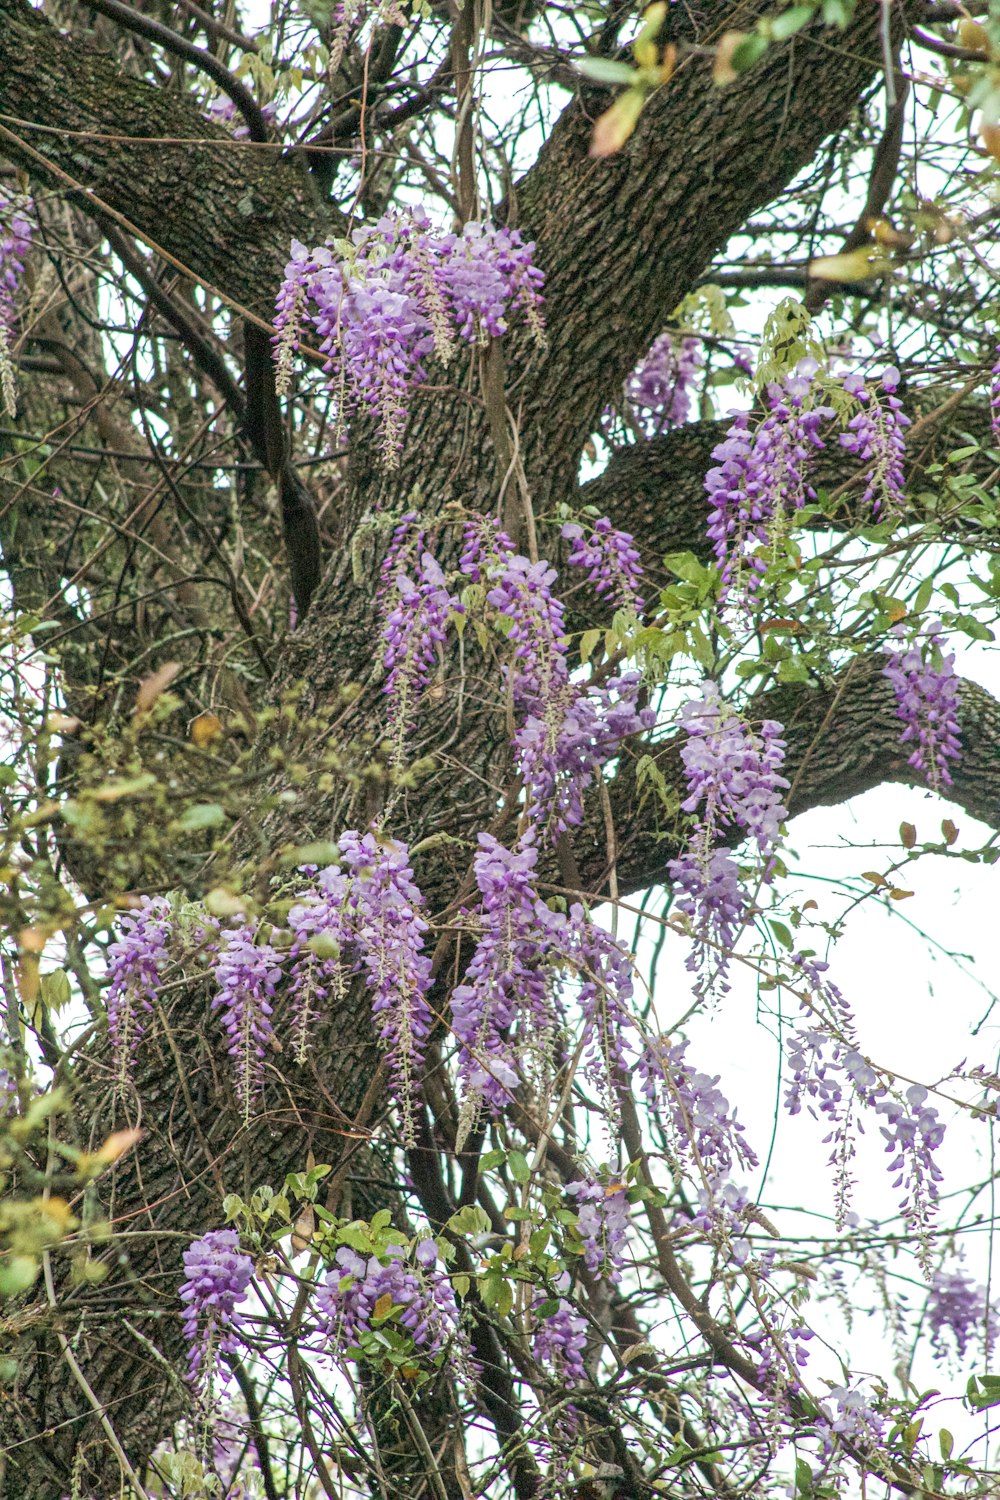 a bird sitting on a branch of a tree with purple flowers